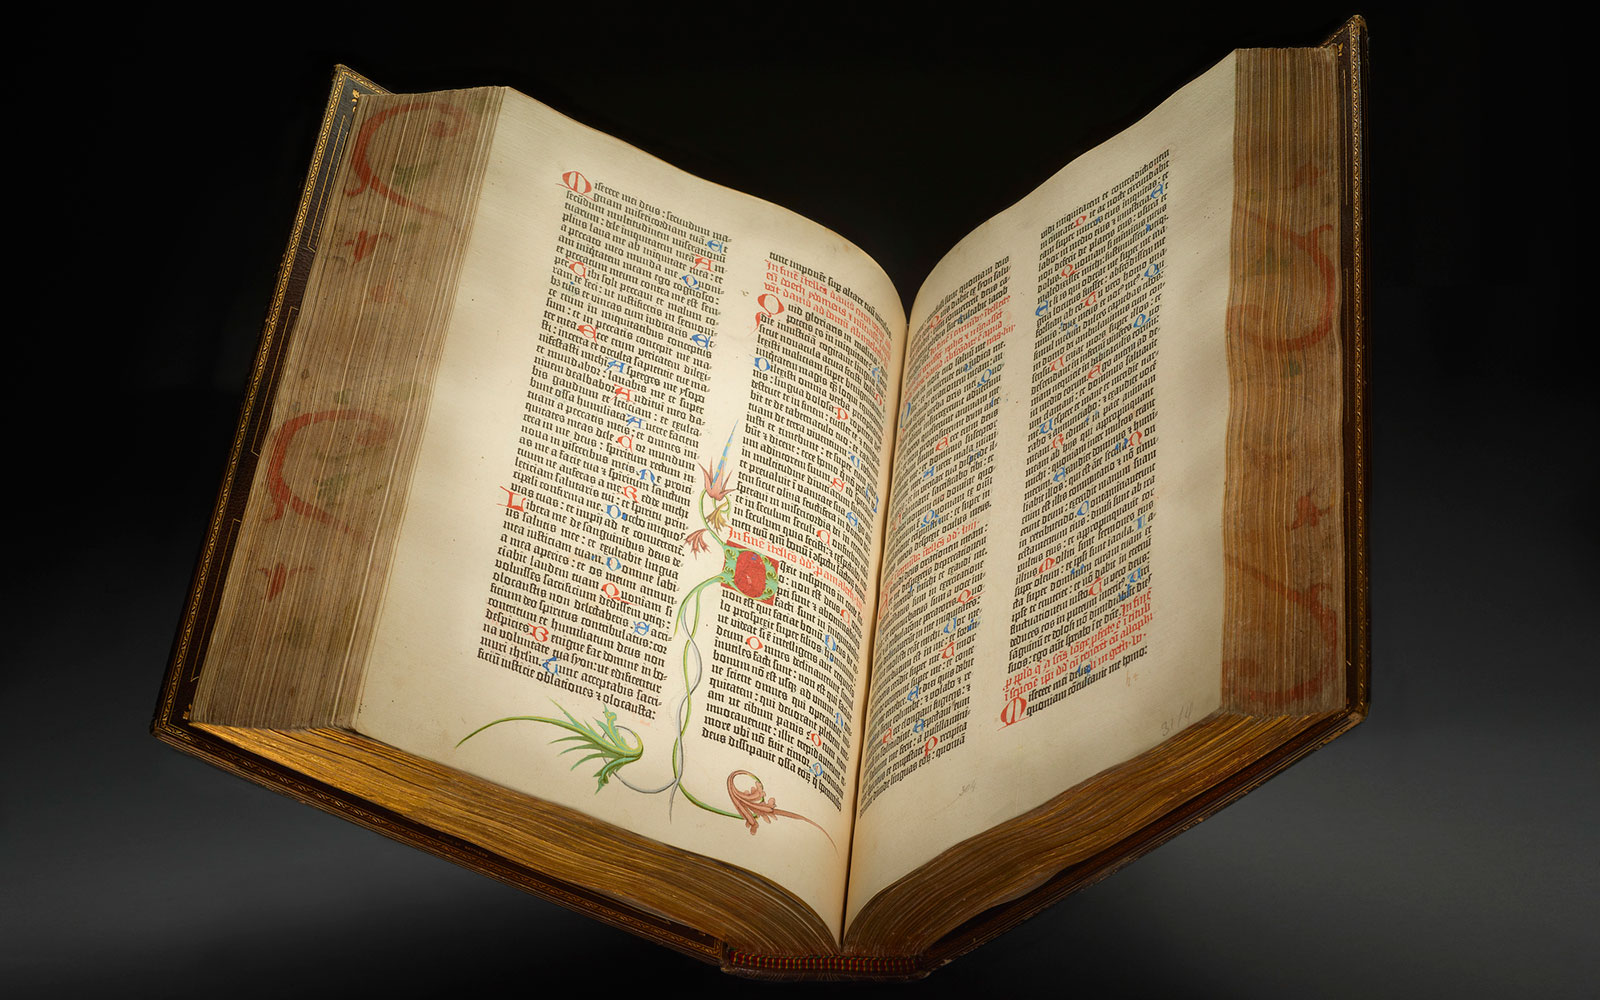 Gutenberg Bible opened to page spread on dark background.